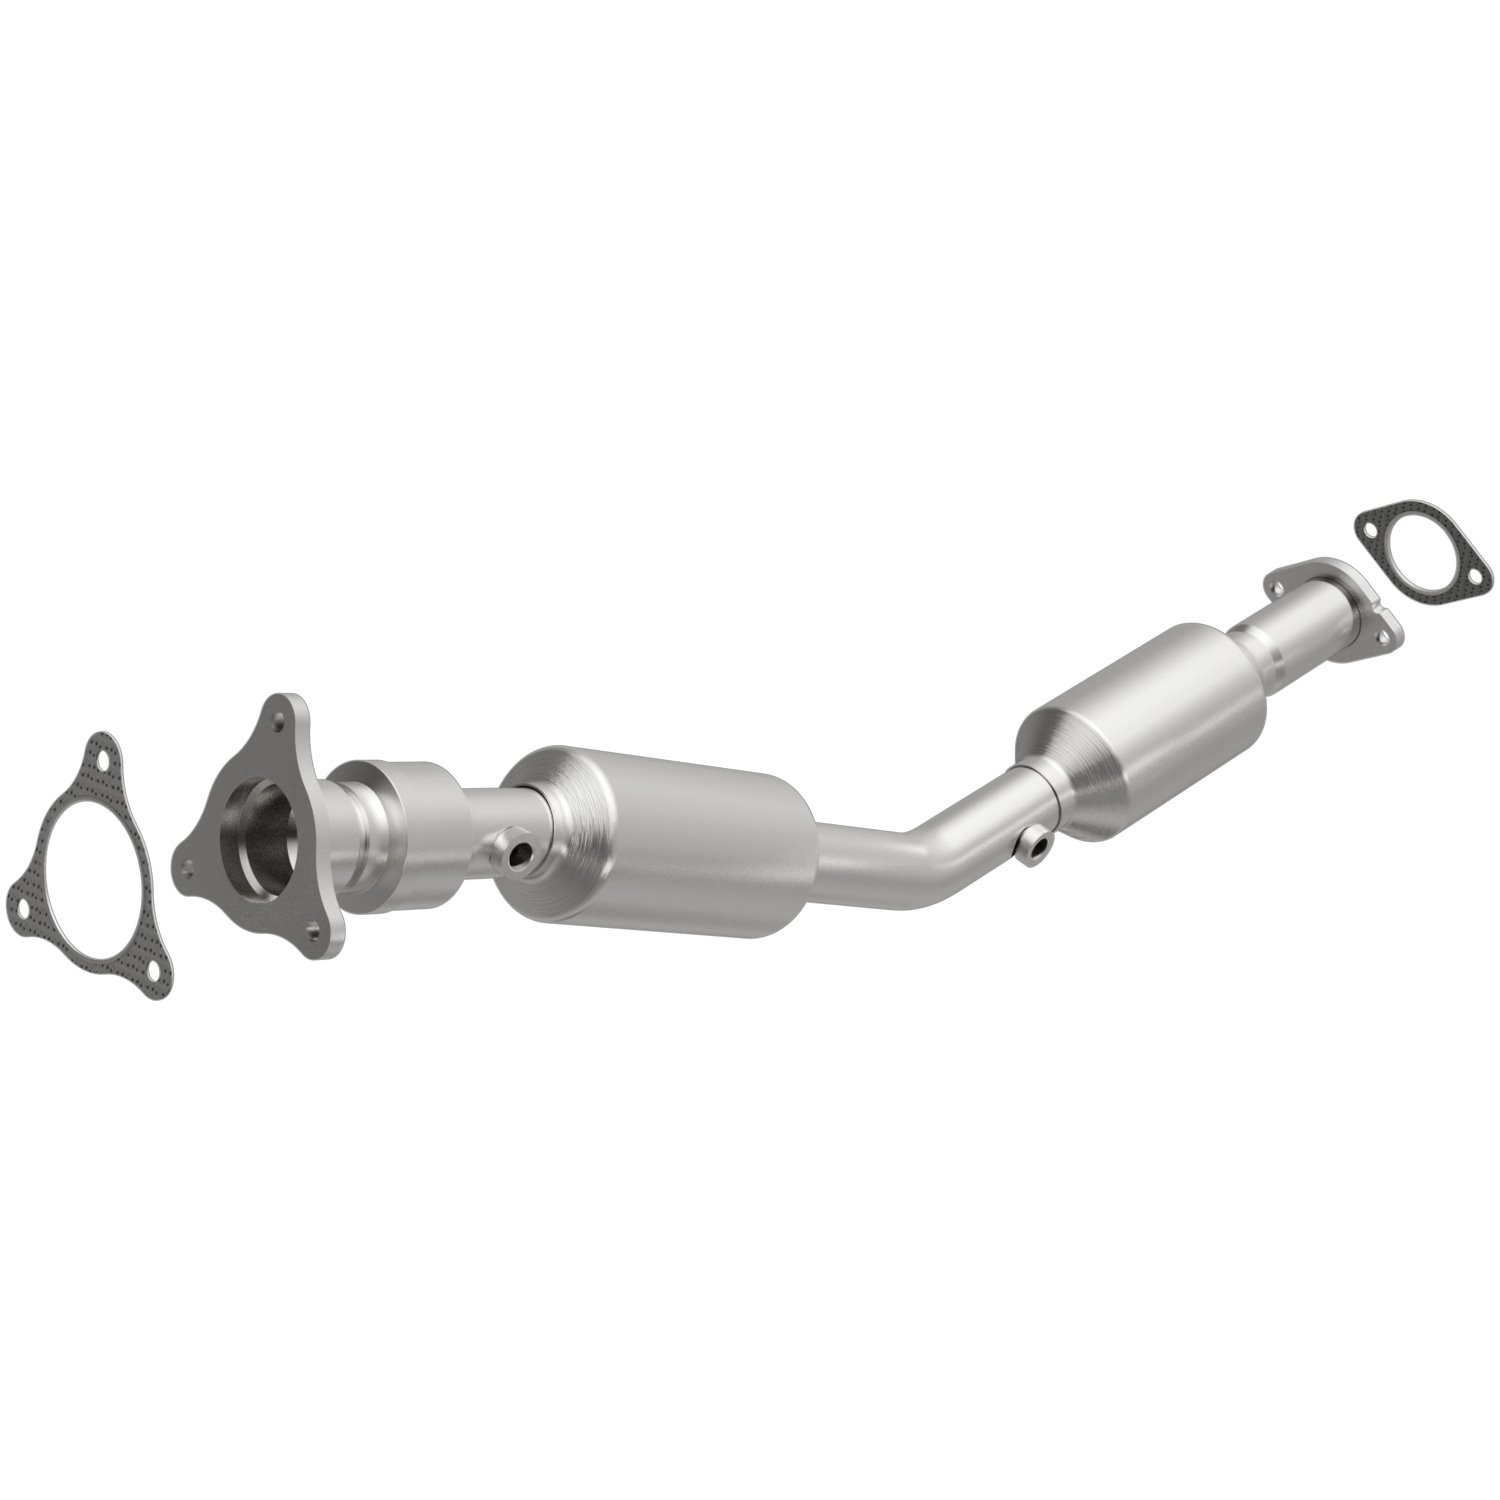 HM Grade Federal / EPA Compliant Direct-Fit Catalytic Converter 24197